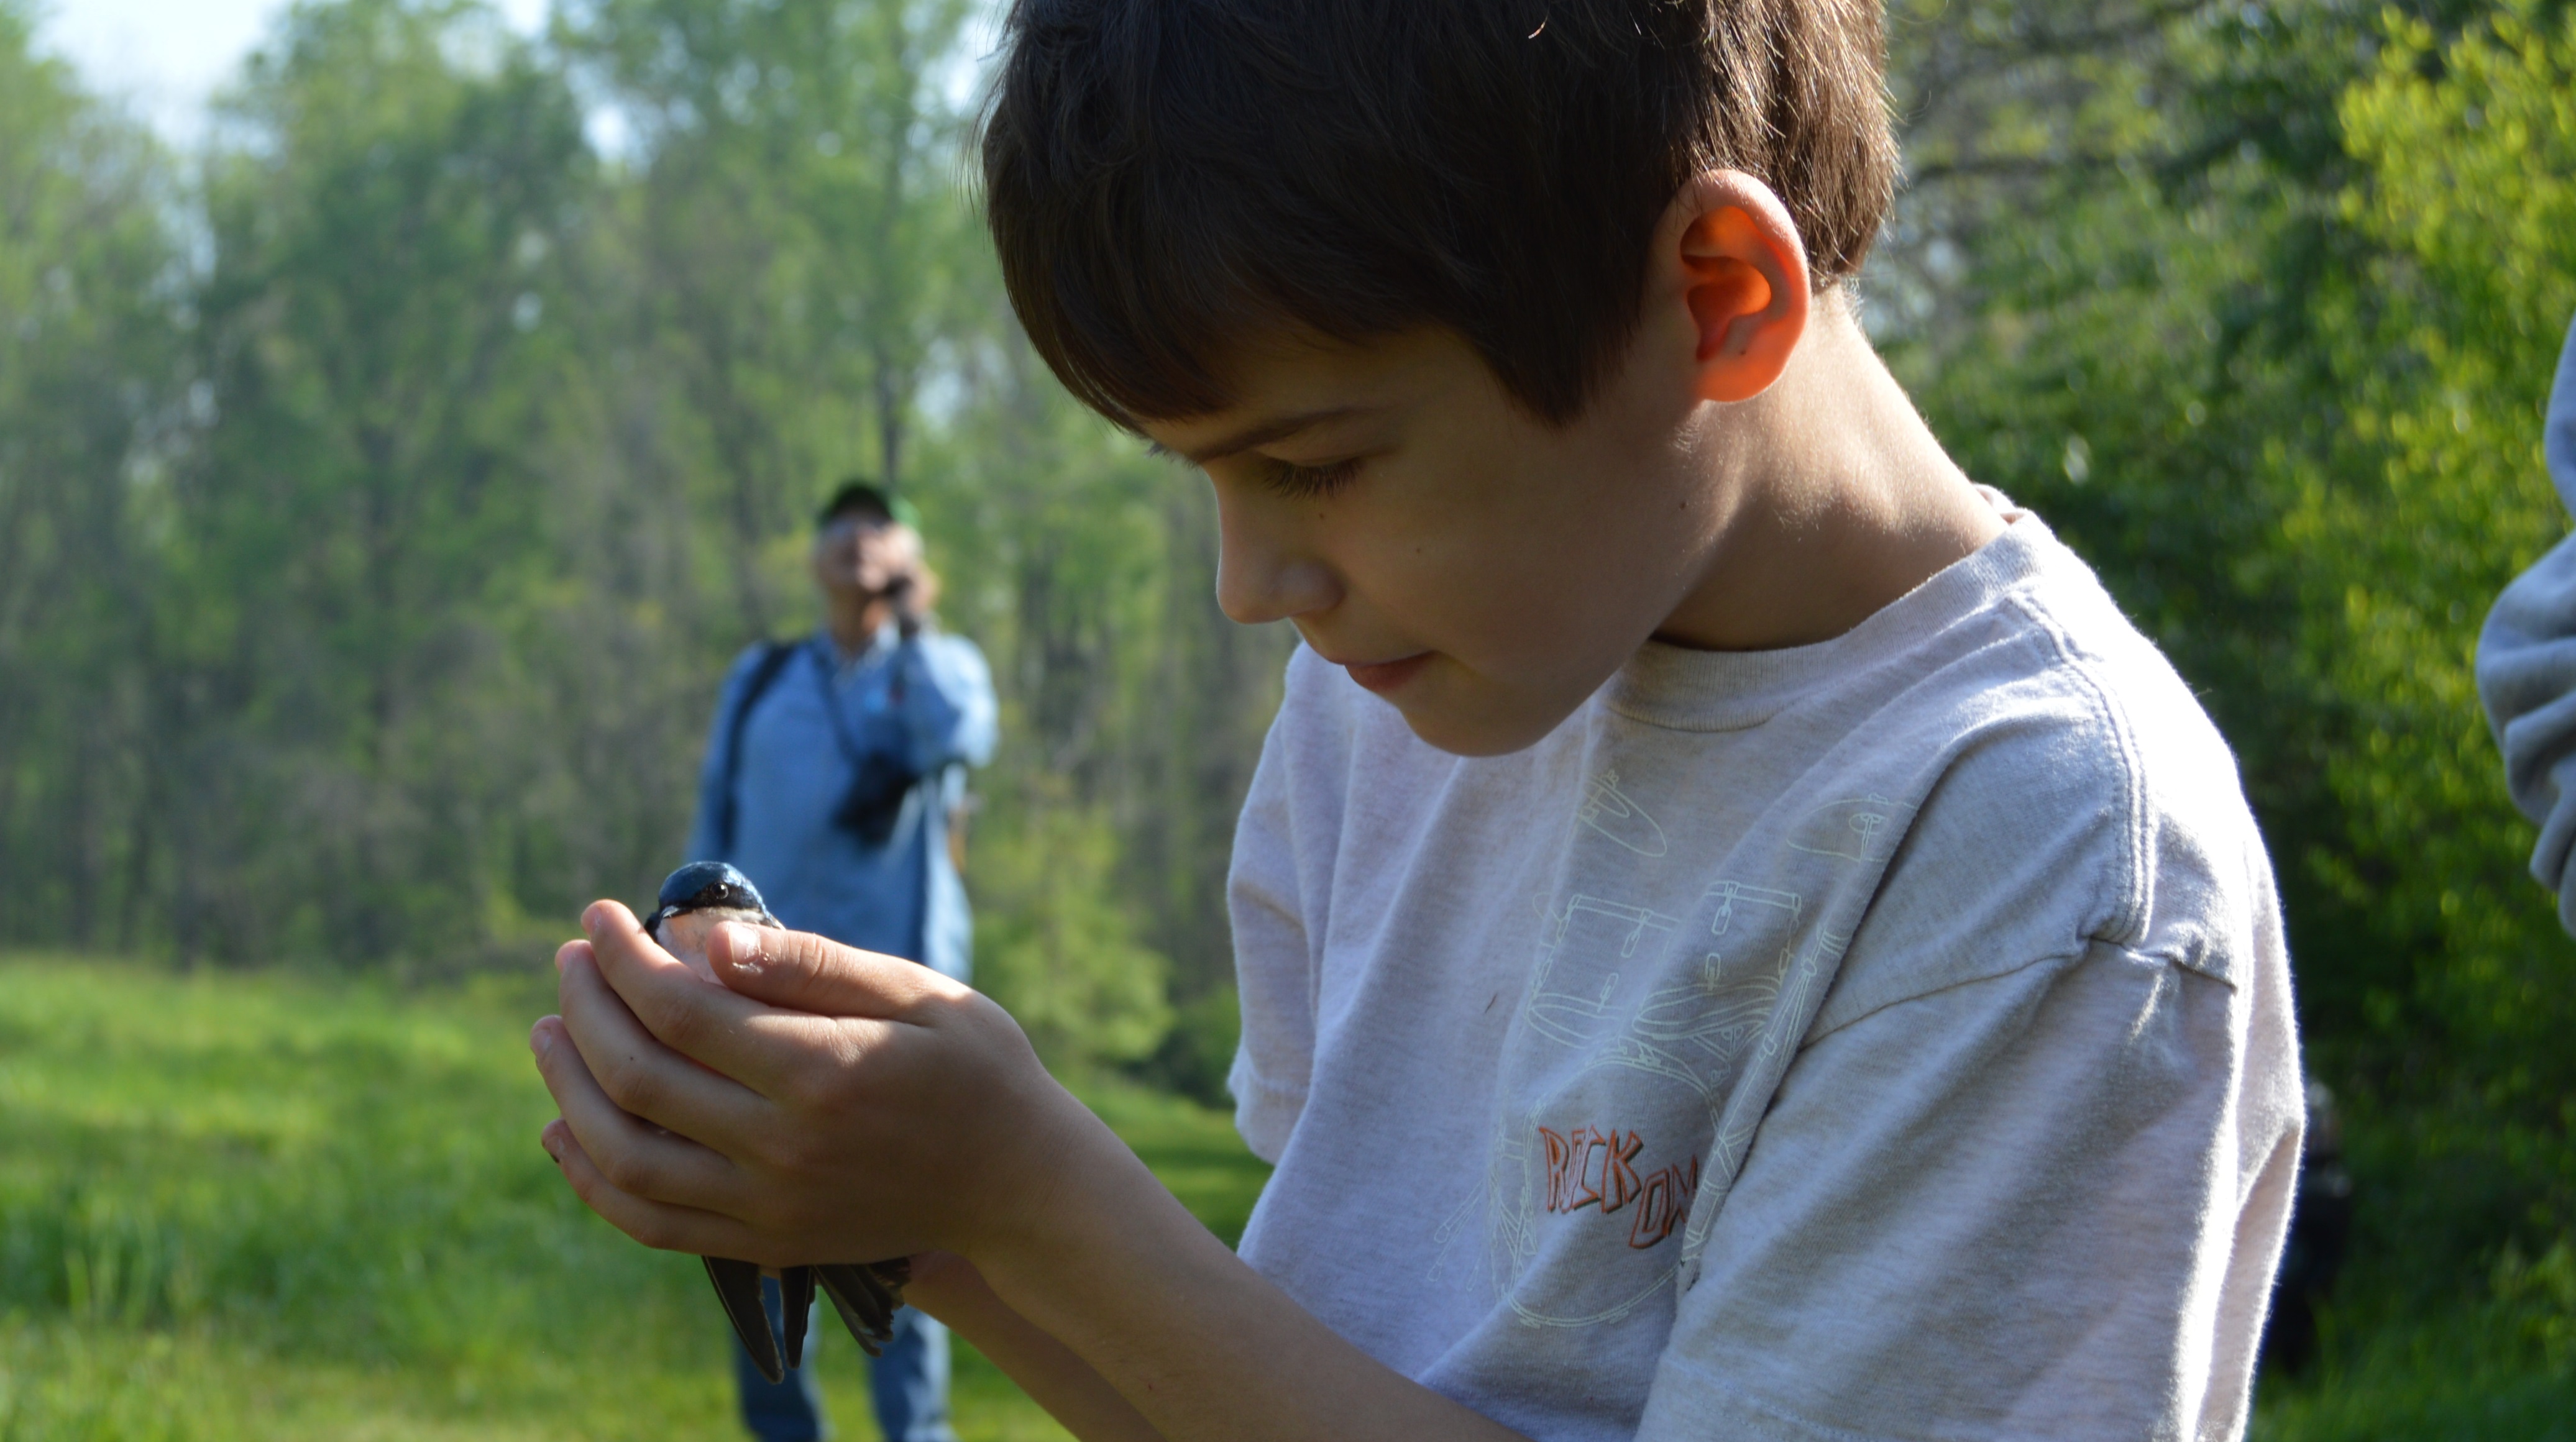 A young naturalist marvels at a shimmering Tree Swallow before release. Photo by Blake Goll/Staff